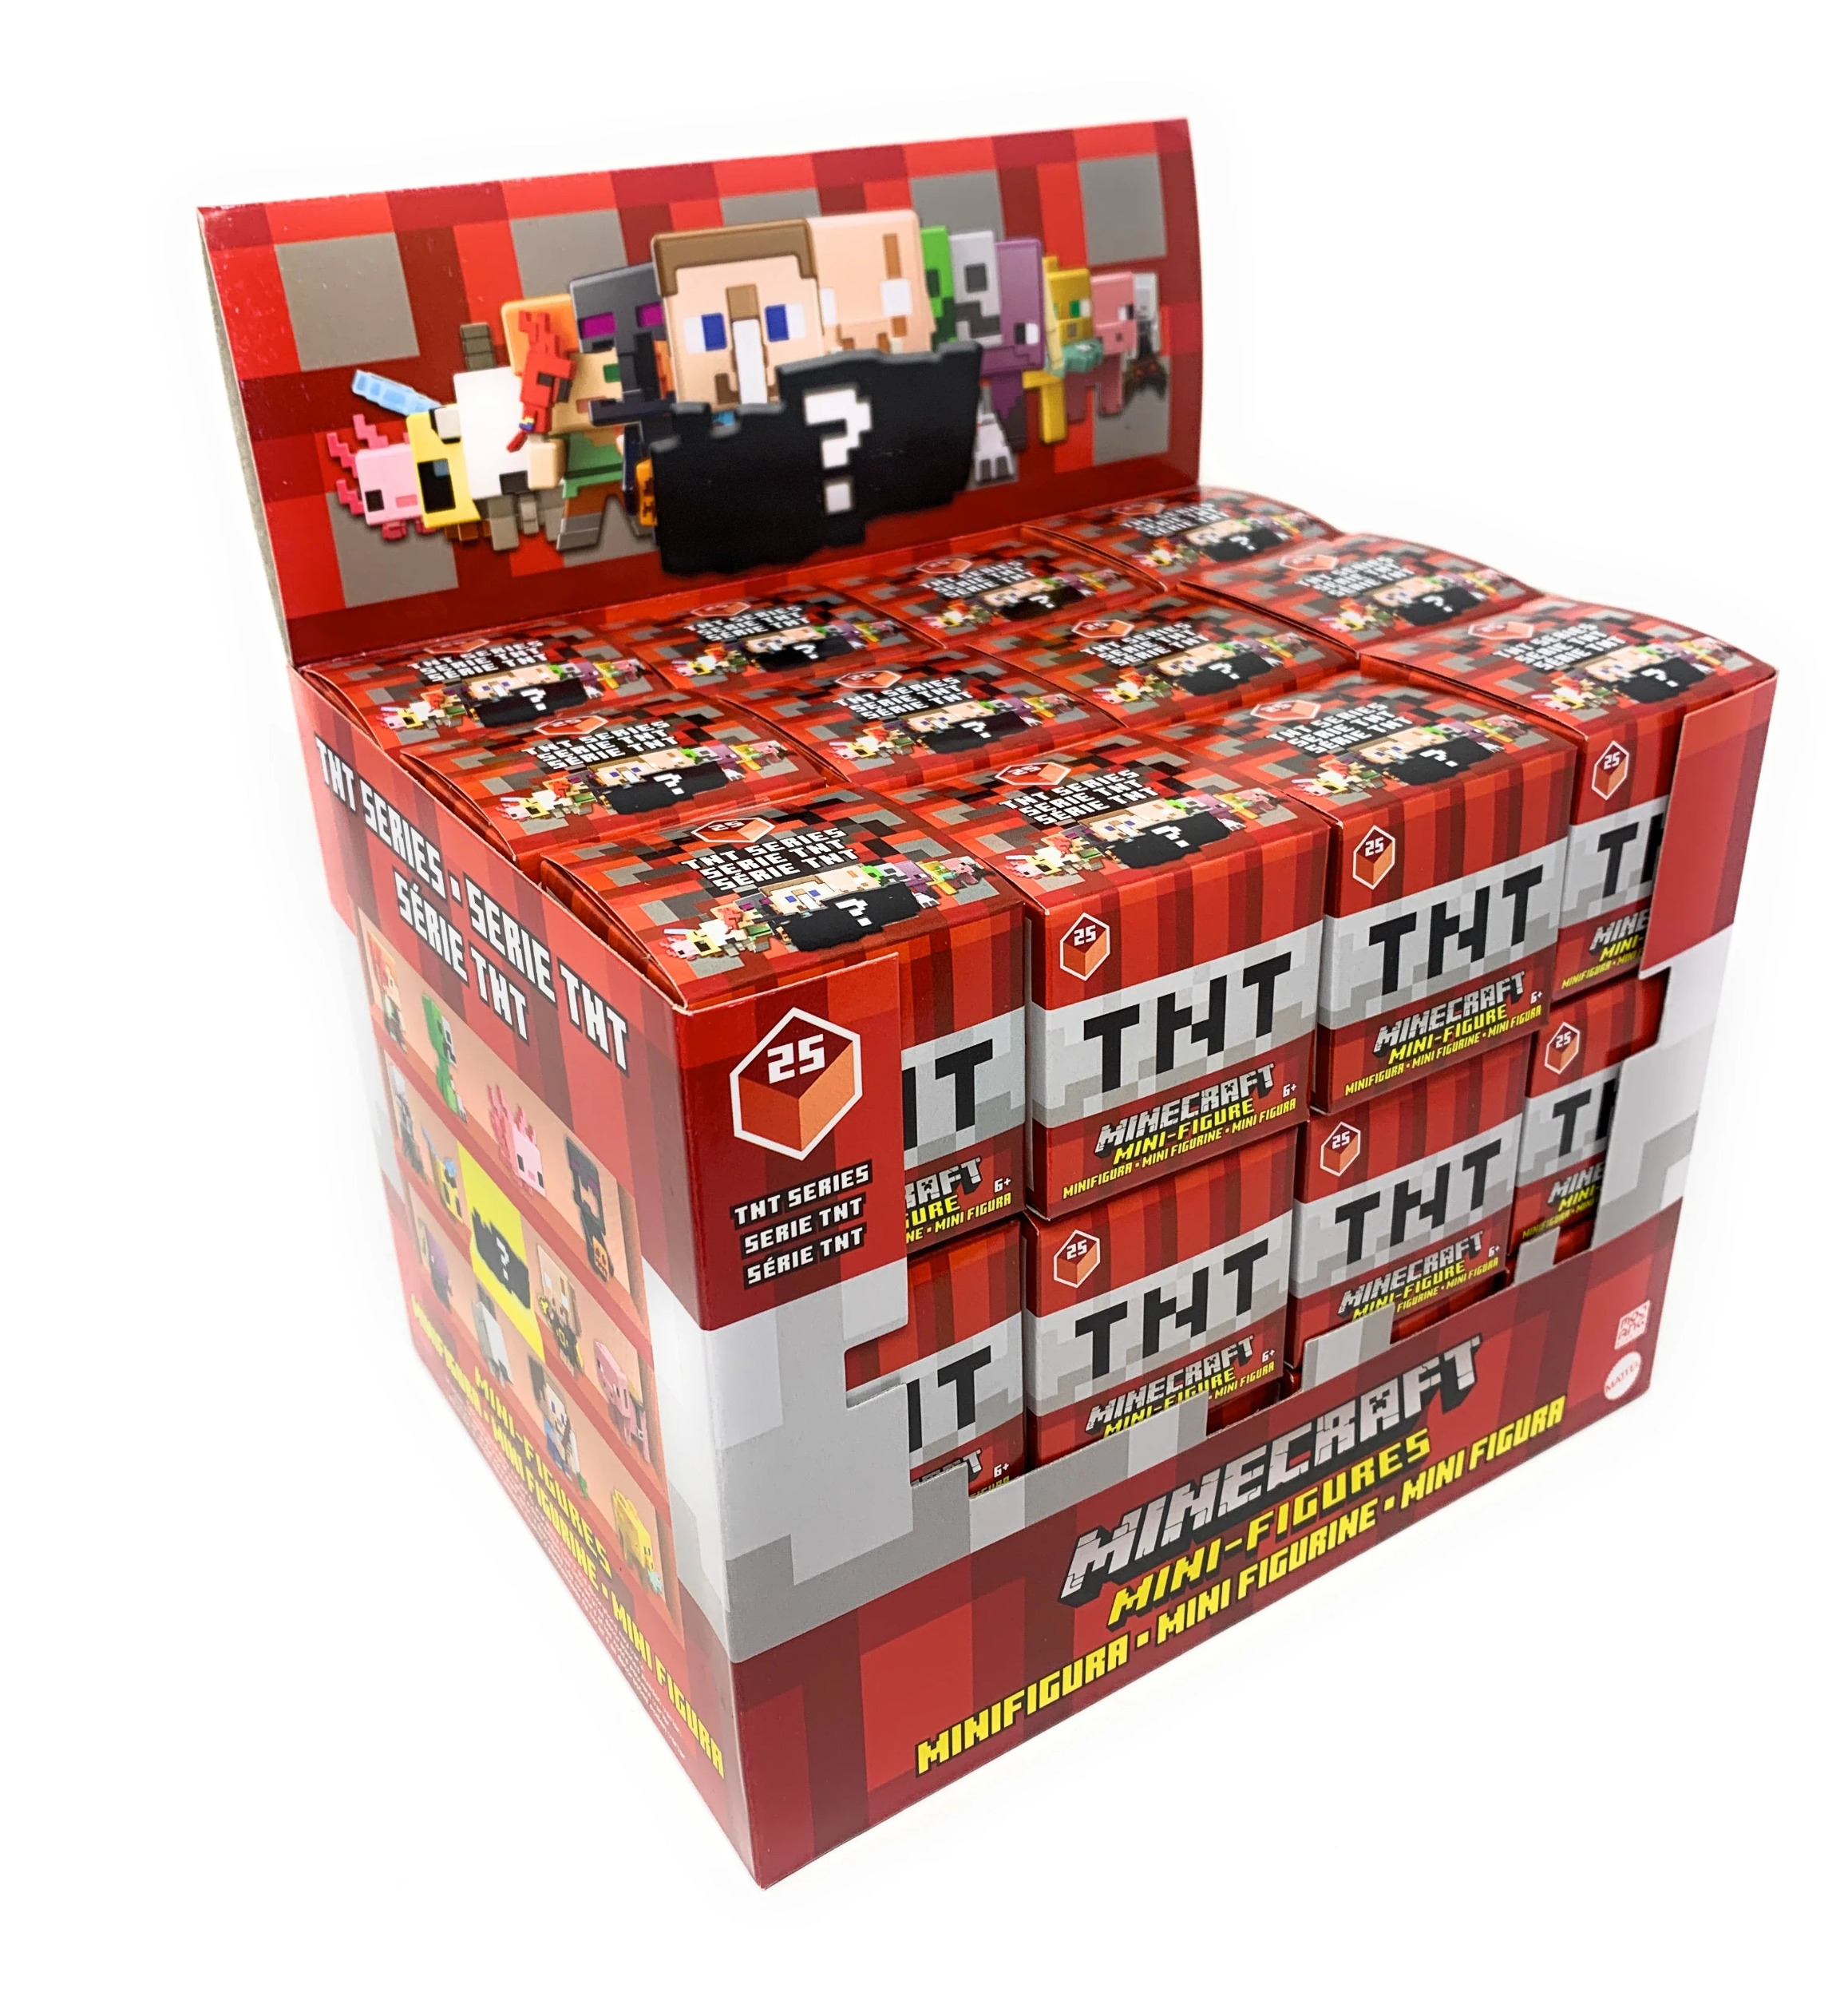 Full Case of Minecraft TNT Series 25 Mystery Boxes 